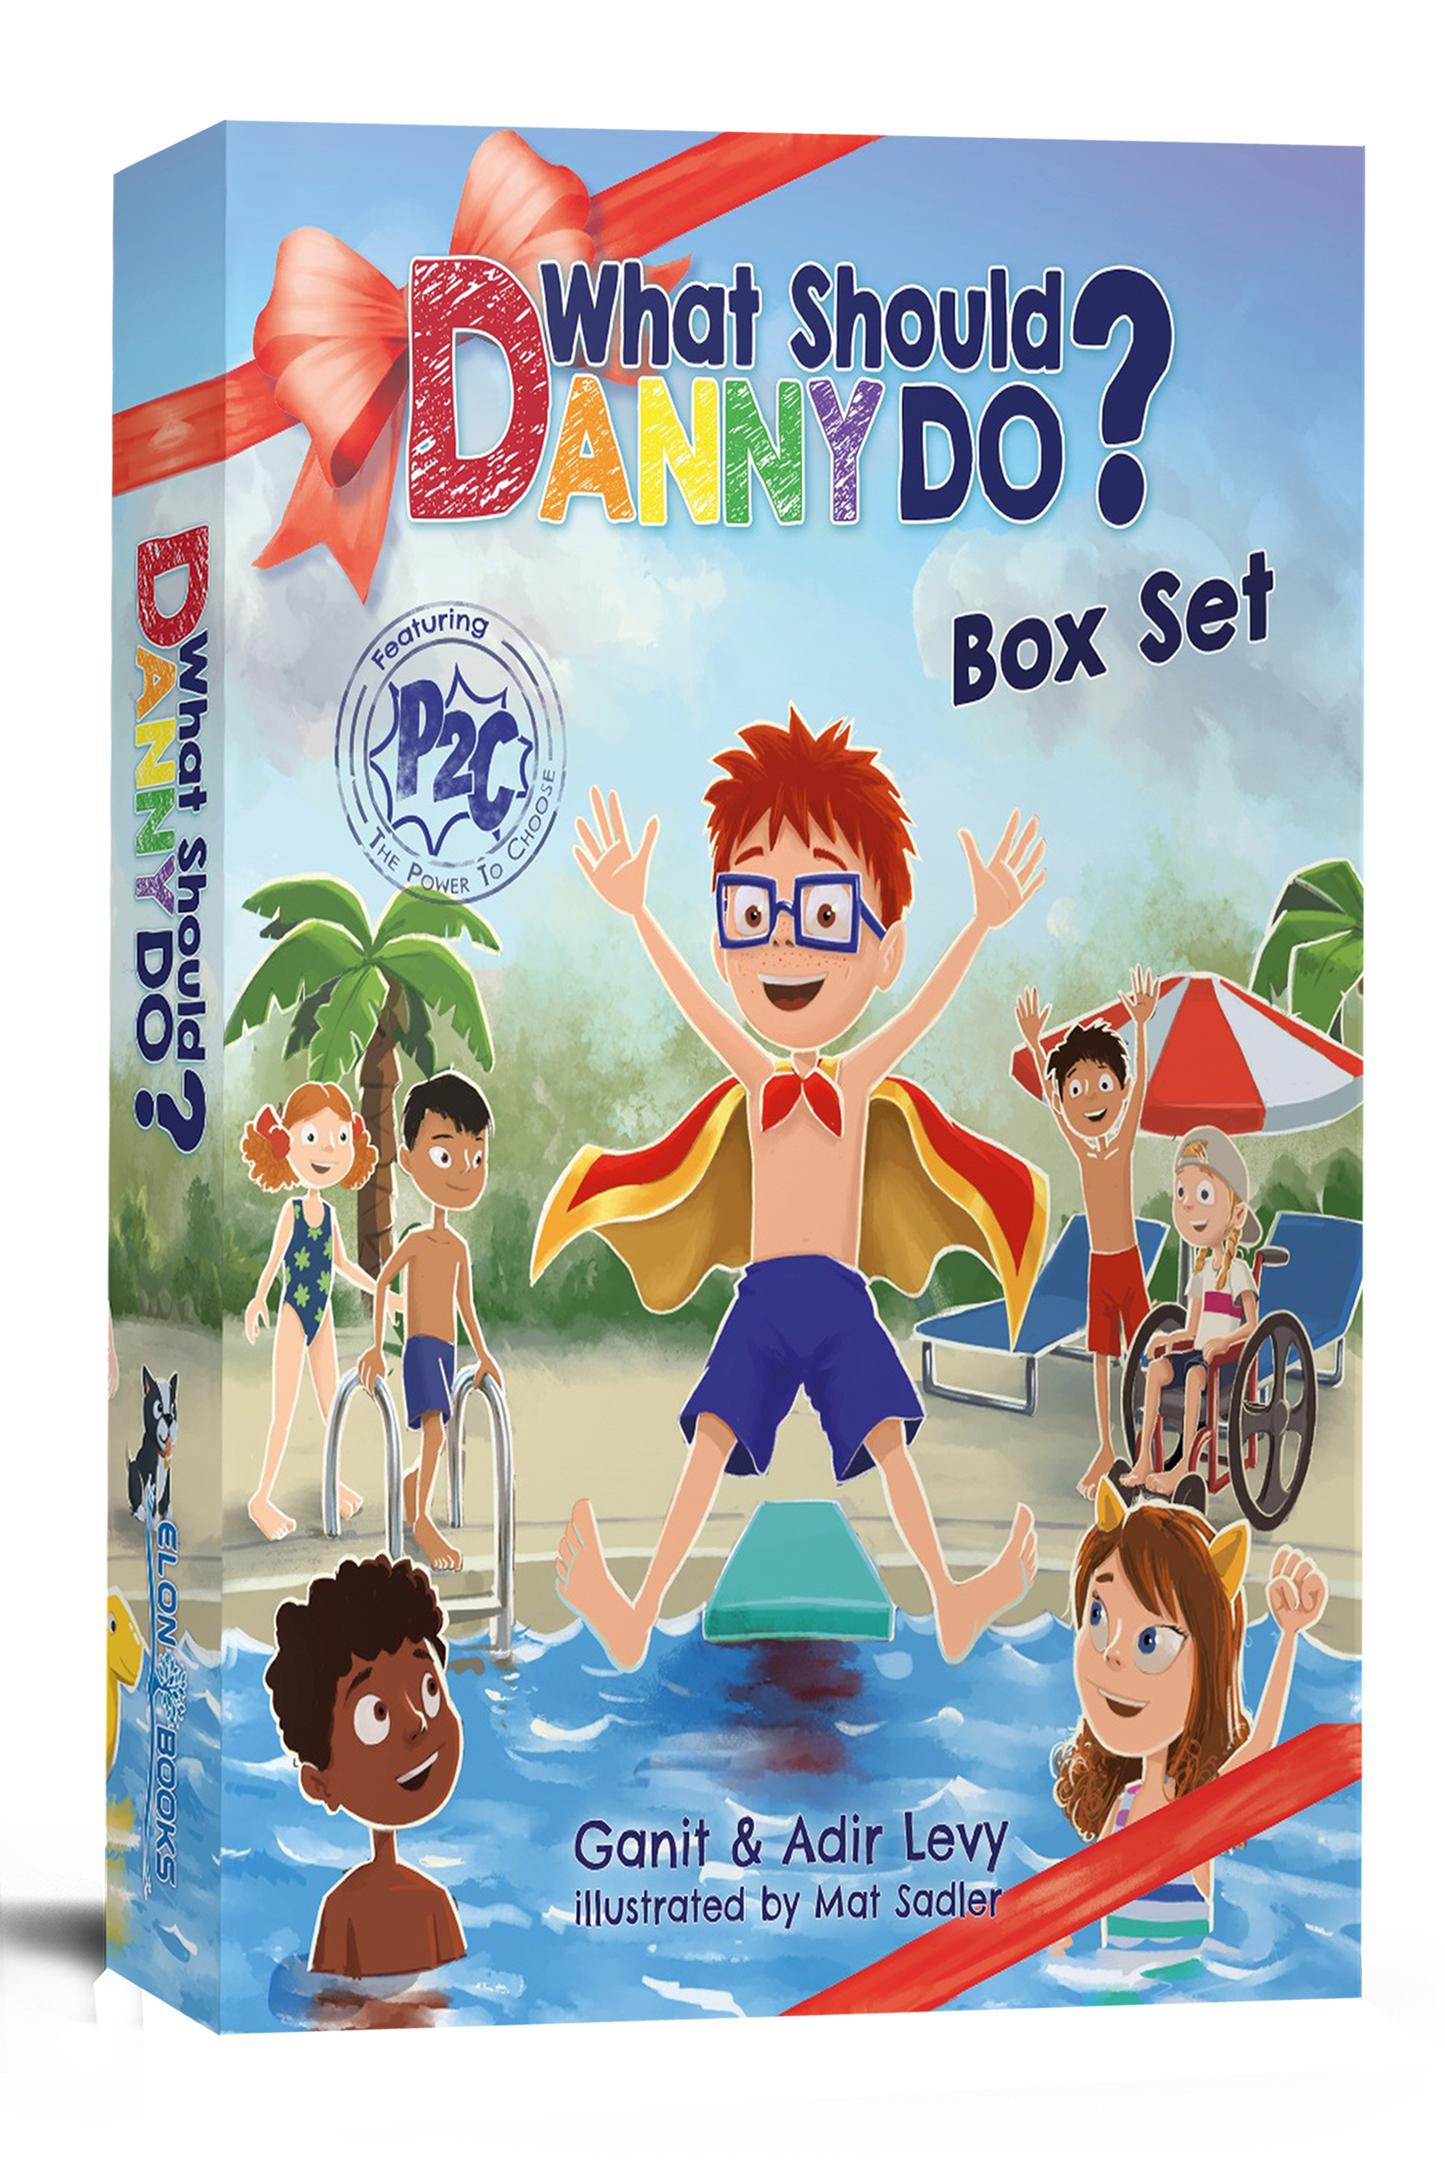 What Should Danny Do? Gift Set + Poster - Limited Edition Box Set!